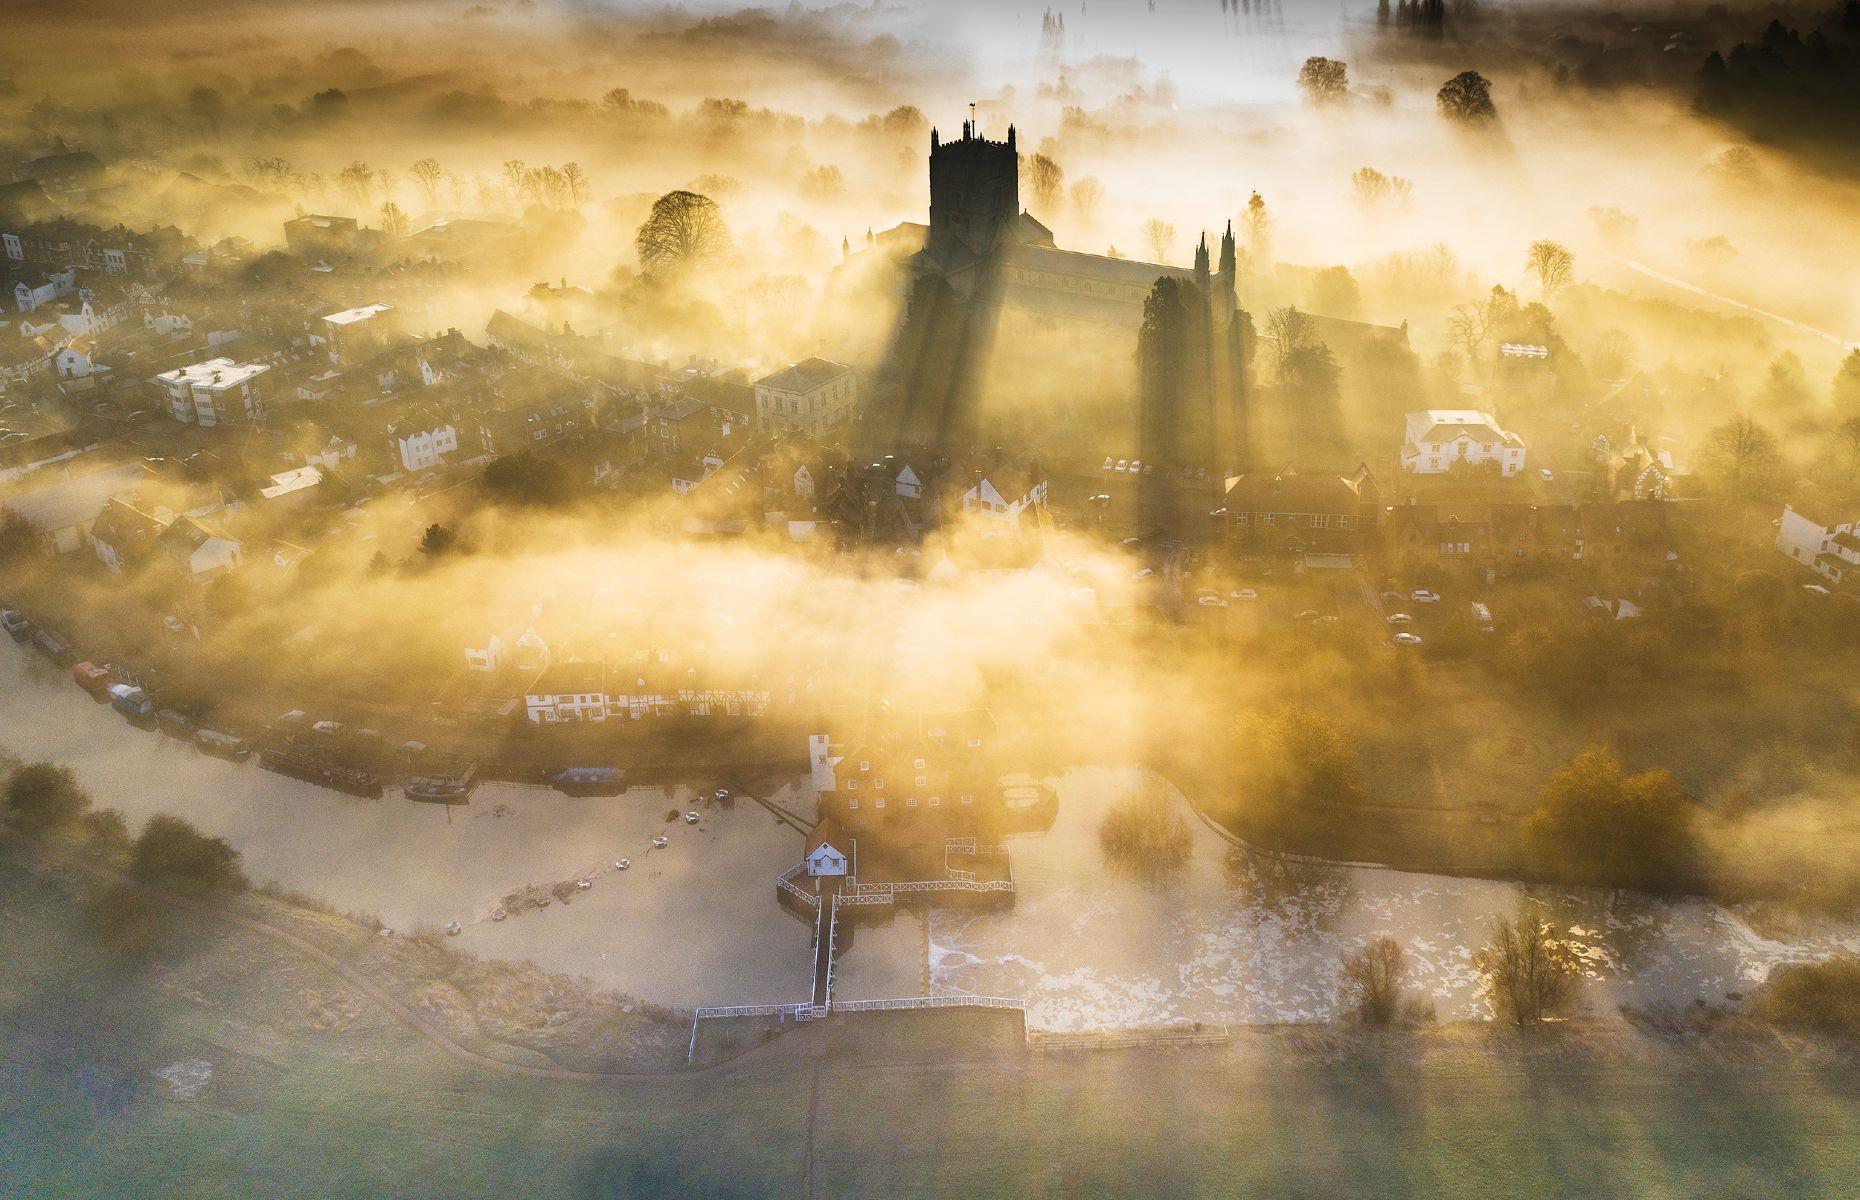 Recognised as one of the UK's finest examples of medieval architecture, the soaring Norman towers of Tewkesbury Abbey have been a recognizable part of Tewkesbury's skyline for almost nine centuries. In this captivating image by Gary Cox, the surrounding mists and golden light only add to the building's ethereal quality.